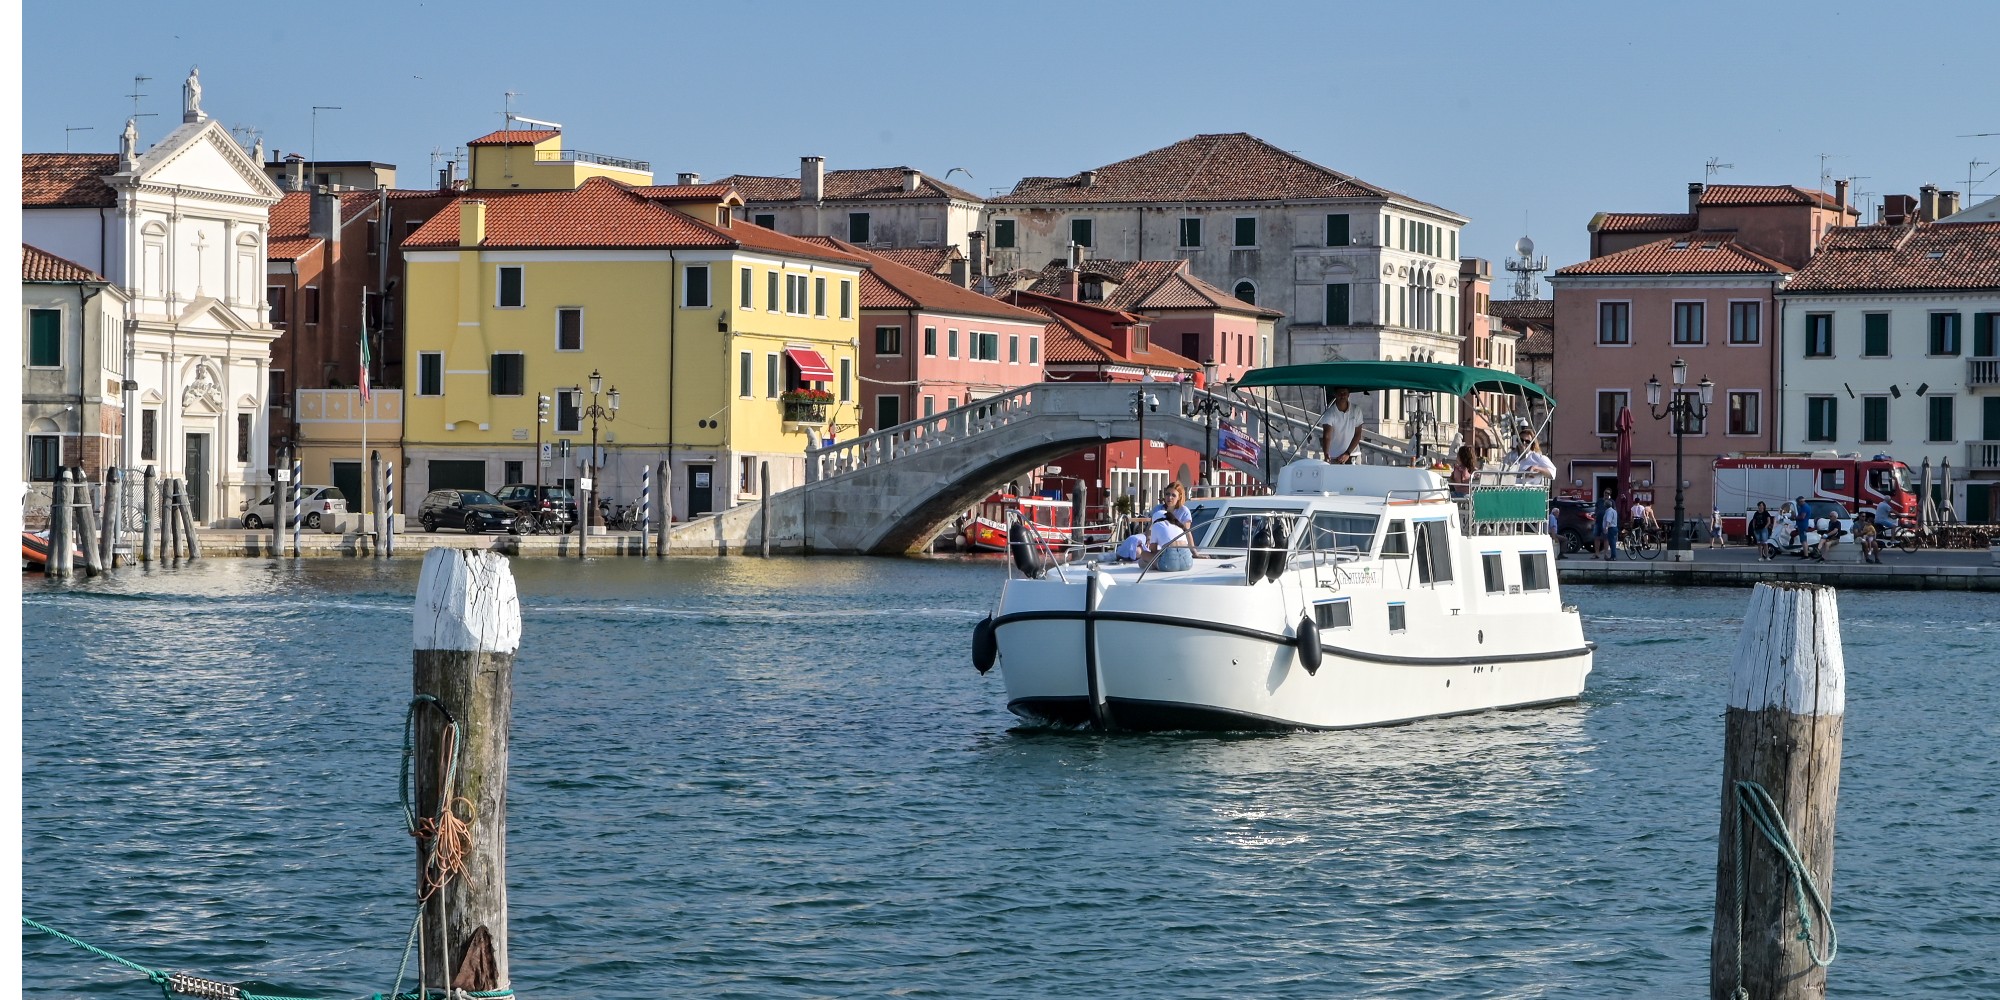 Houseboat: weekend to discover the Venice Lagoon